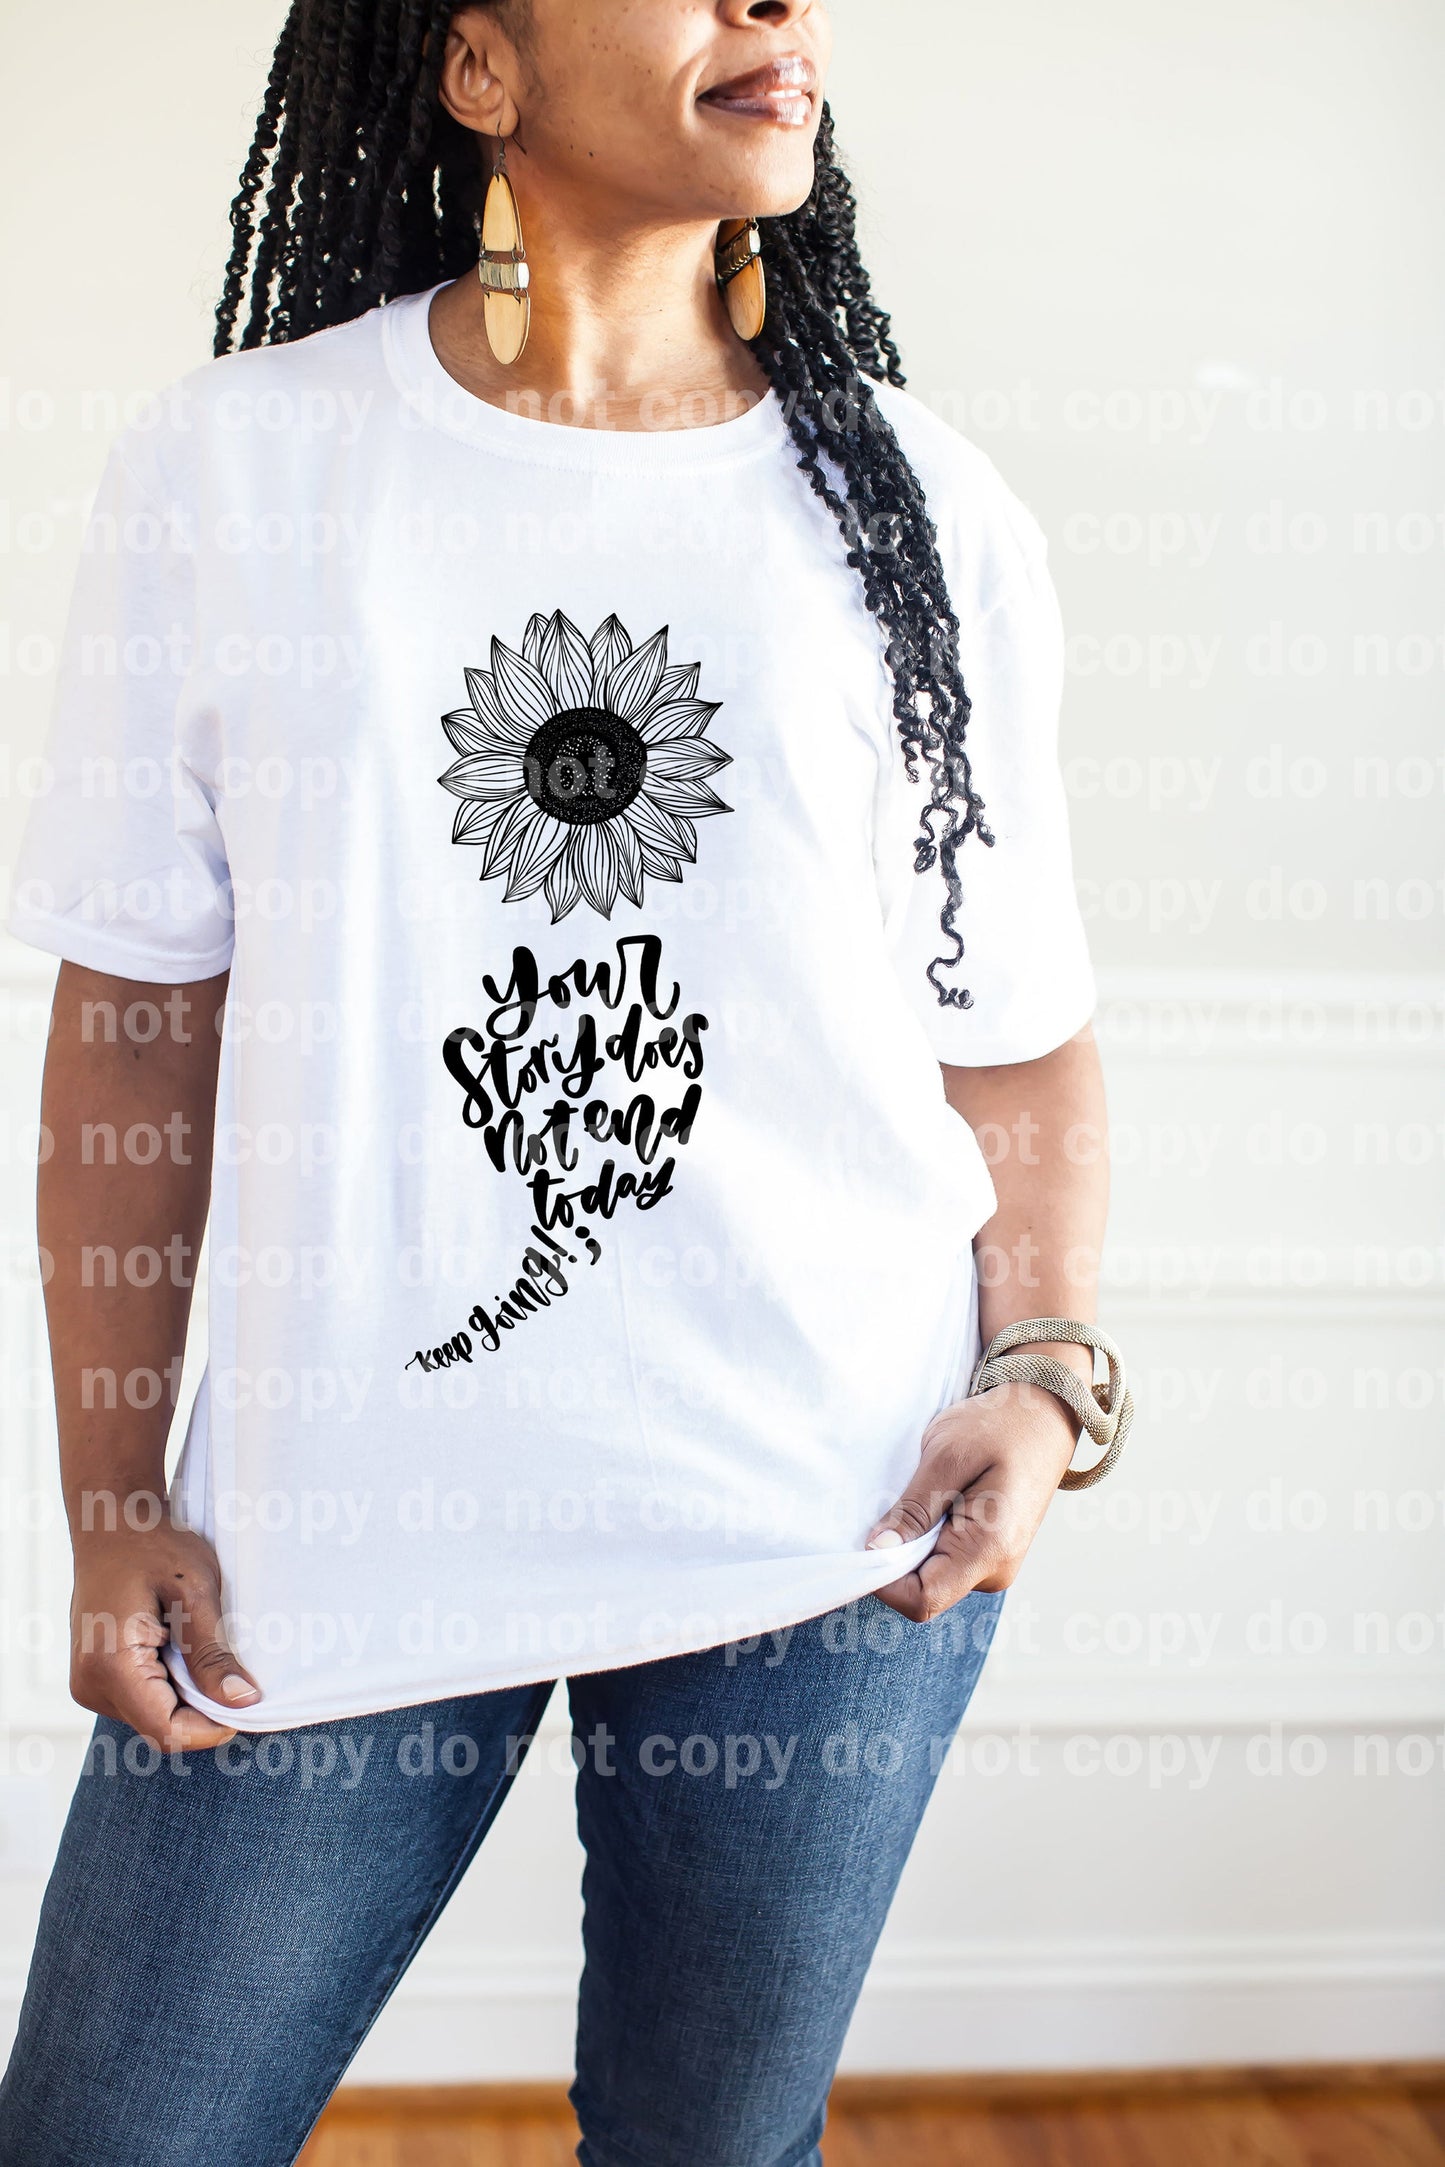 Your Story Does Not End Today Keep Going Full Color/One Color Dream Print or Sublimation Print